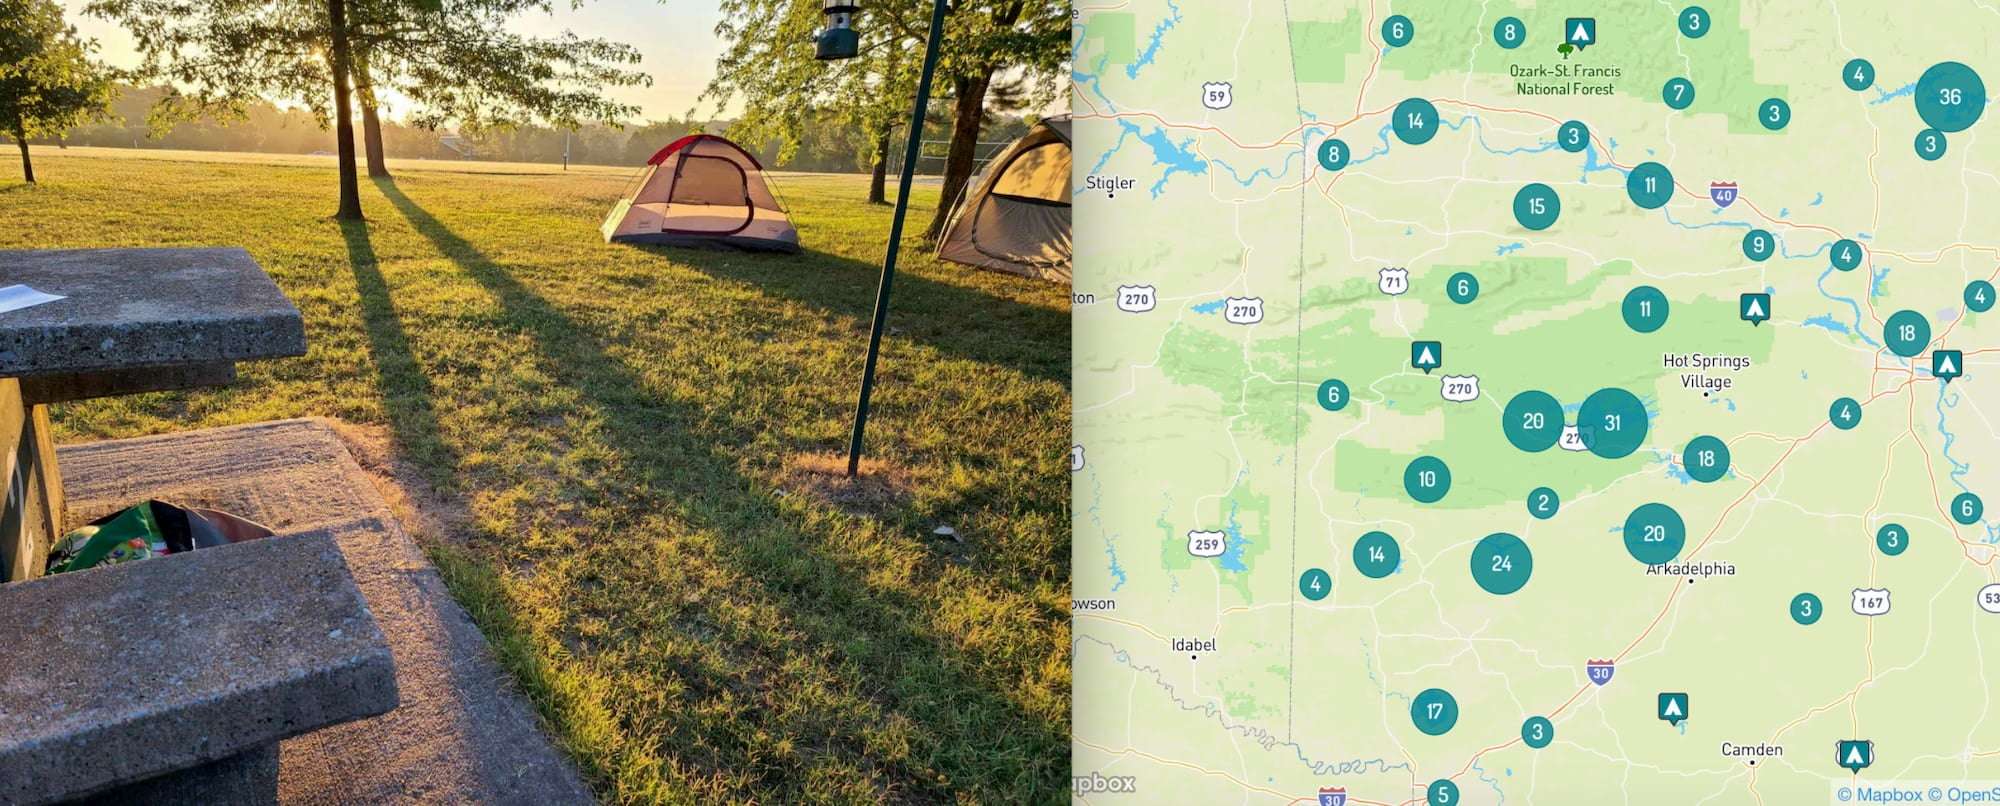 7 Awesome Campgrounds in Northwest ArkansasâFt. Smith ...